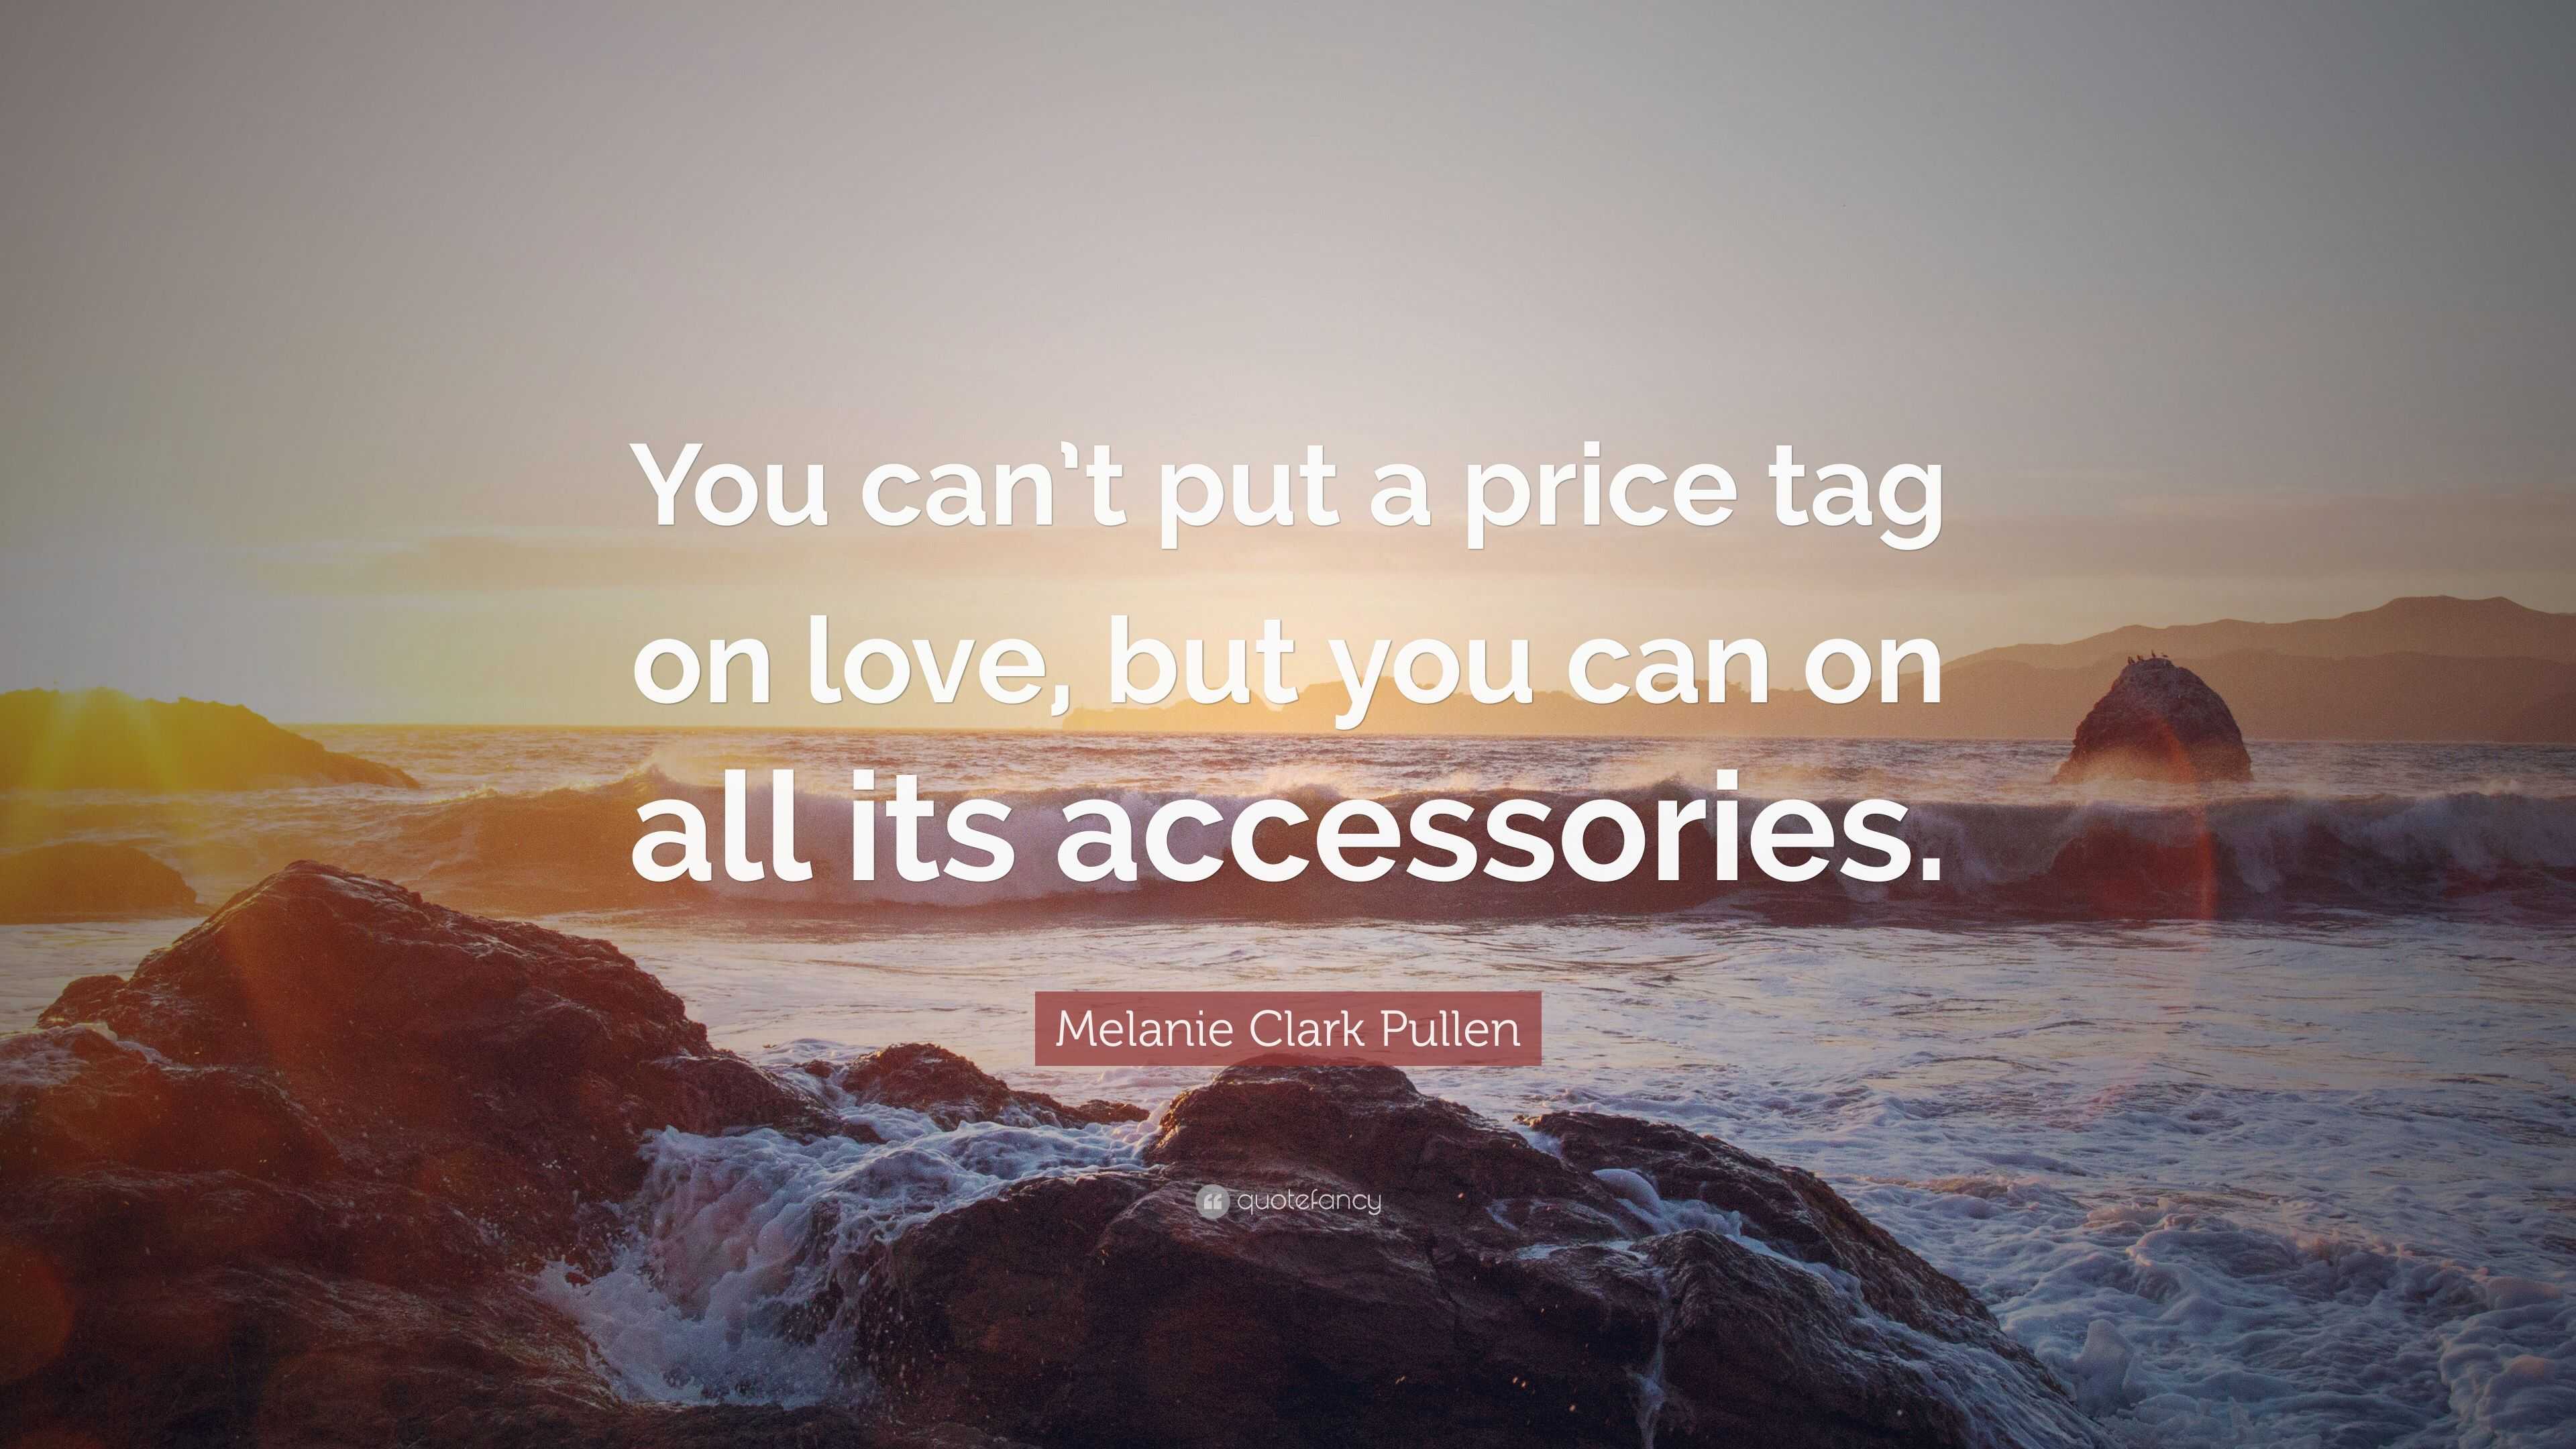 Melanie Clark Pullen Quote “You can t put a price tag on love